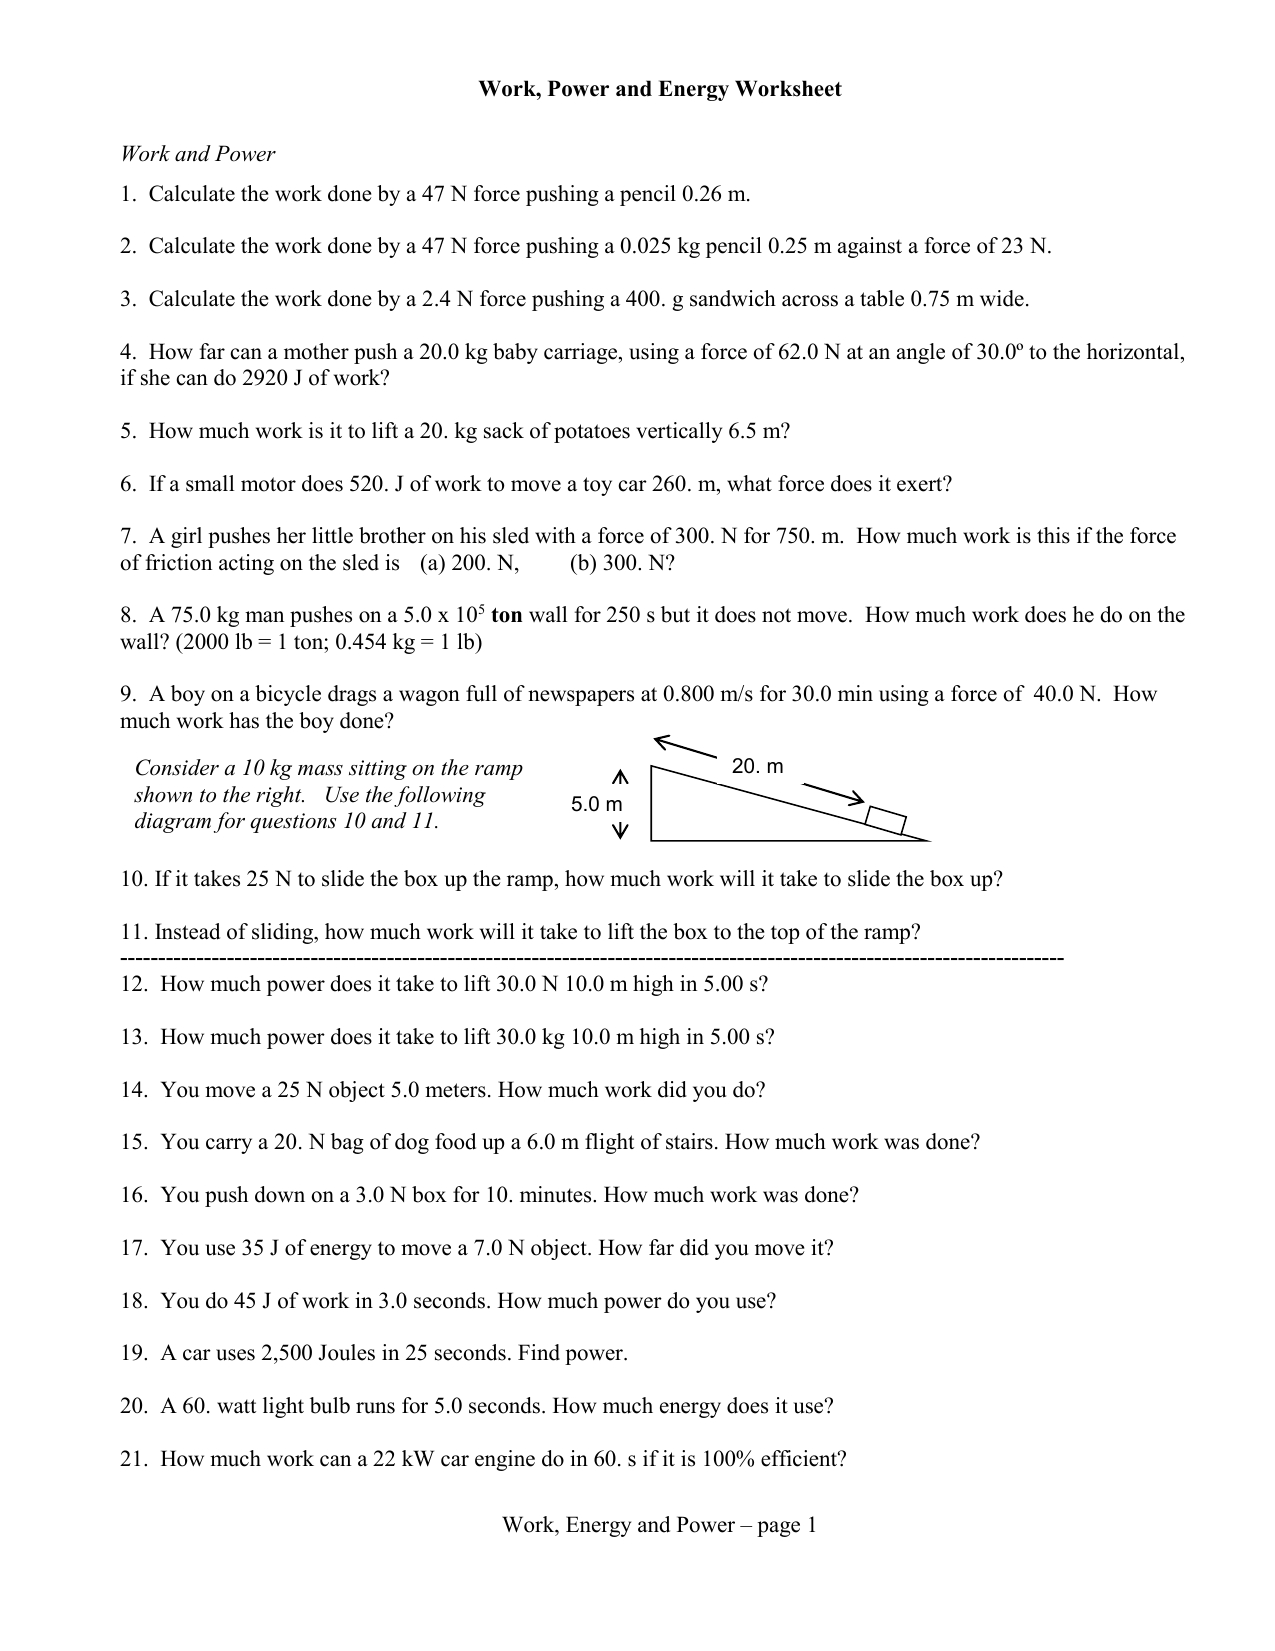 Work Power And Energy Worksheet Together With Work Energy And Power Worksheet Answer Key